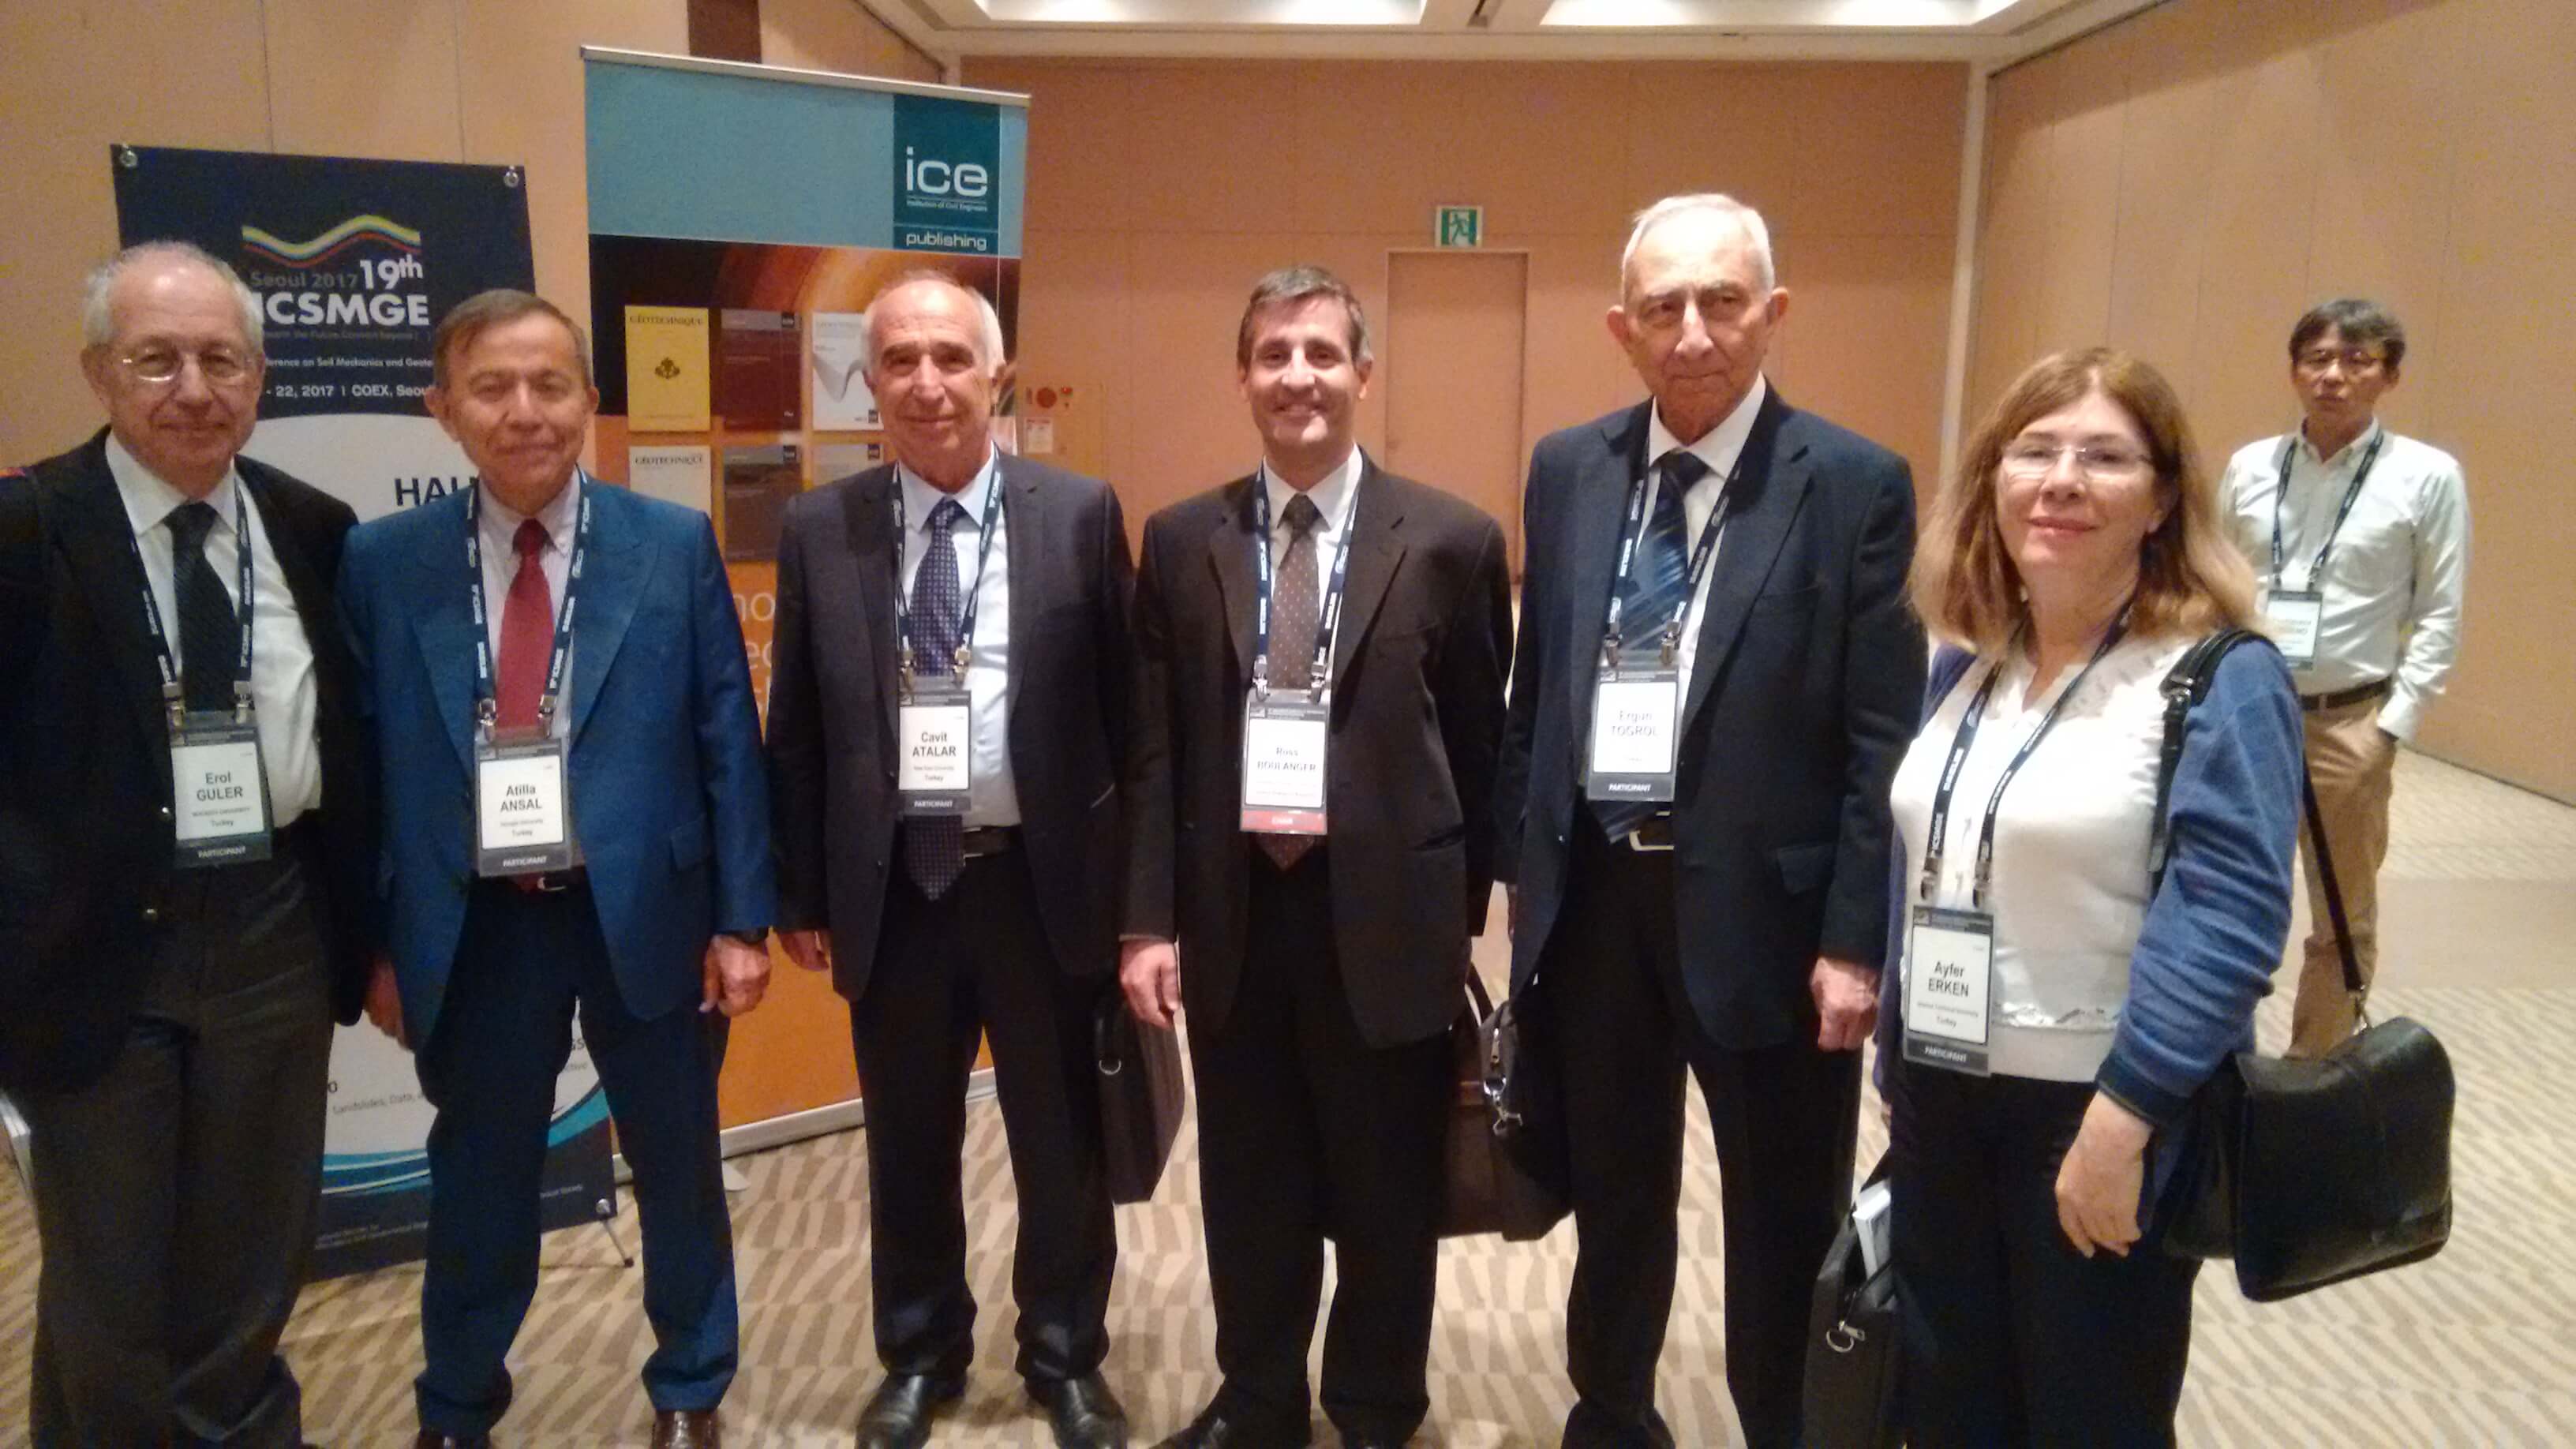 Near East University represented TRNC at the 19th International Conference on Soil Mechanics and Geotechnical Engineering that held in South Korea and participated by approximately 2000 Scientists from more than 80 Countries